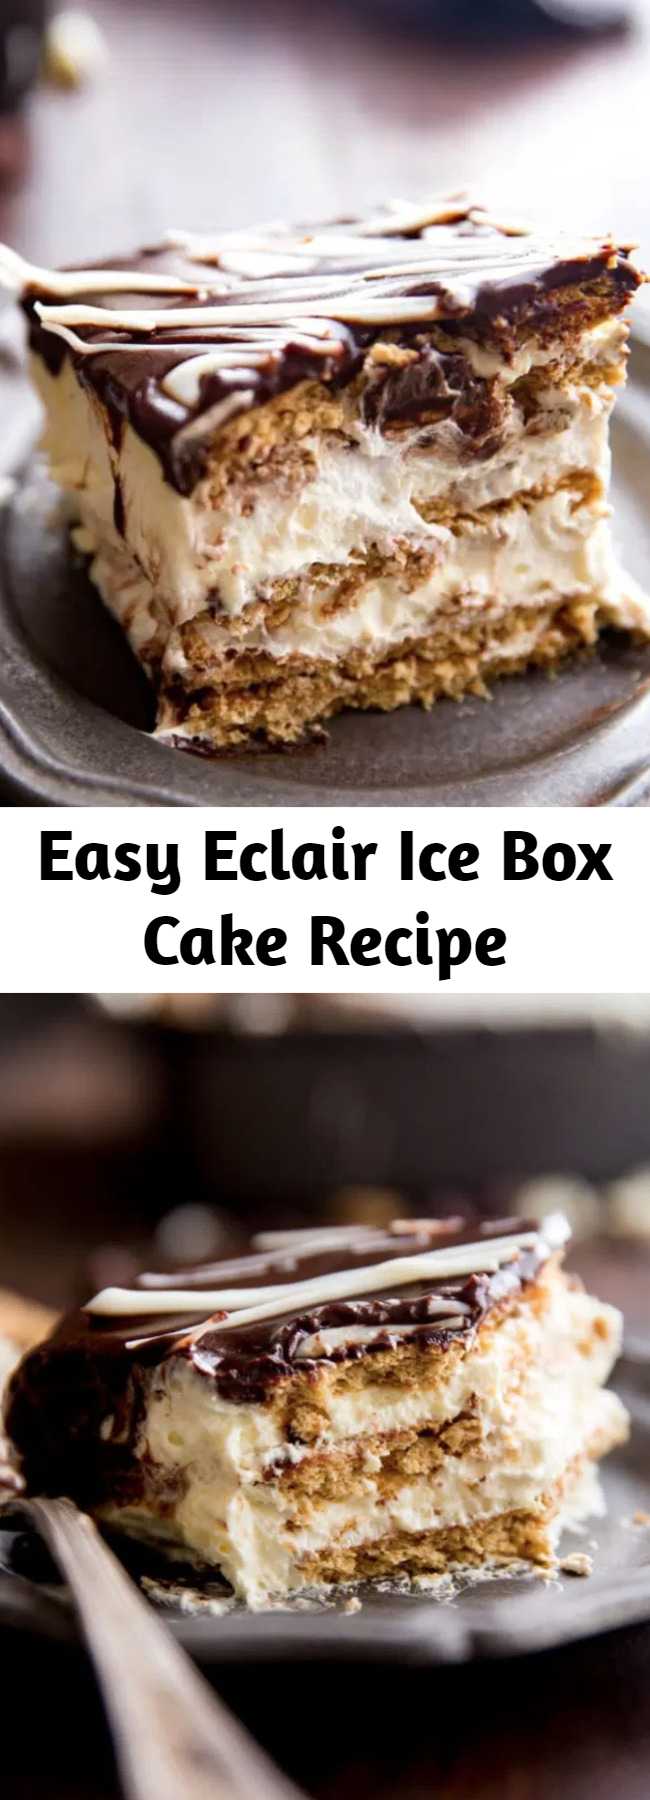 Easy Eclair Ice Box Cake Recipe - No bake ice box cake that tastes like eclairs. No baking, no fuss, this easy ice box cake is absolutely delicious and just so fun. Rich chocolate topping, fun vanilla custardy center, and graham crackers. It tastes like an eclair in cake form! And is way easier than baking eclairs. This is my favorite dessert. You can impress your friends and family, with this crowd favorite!